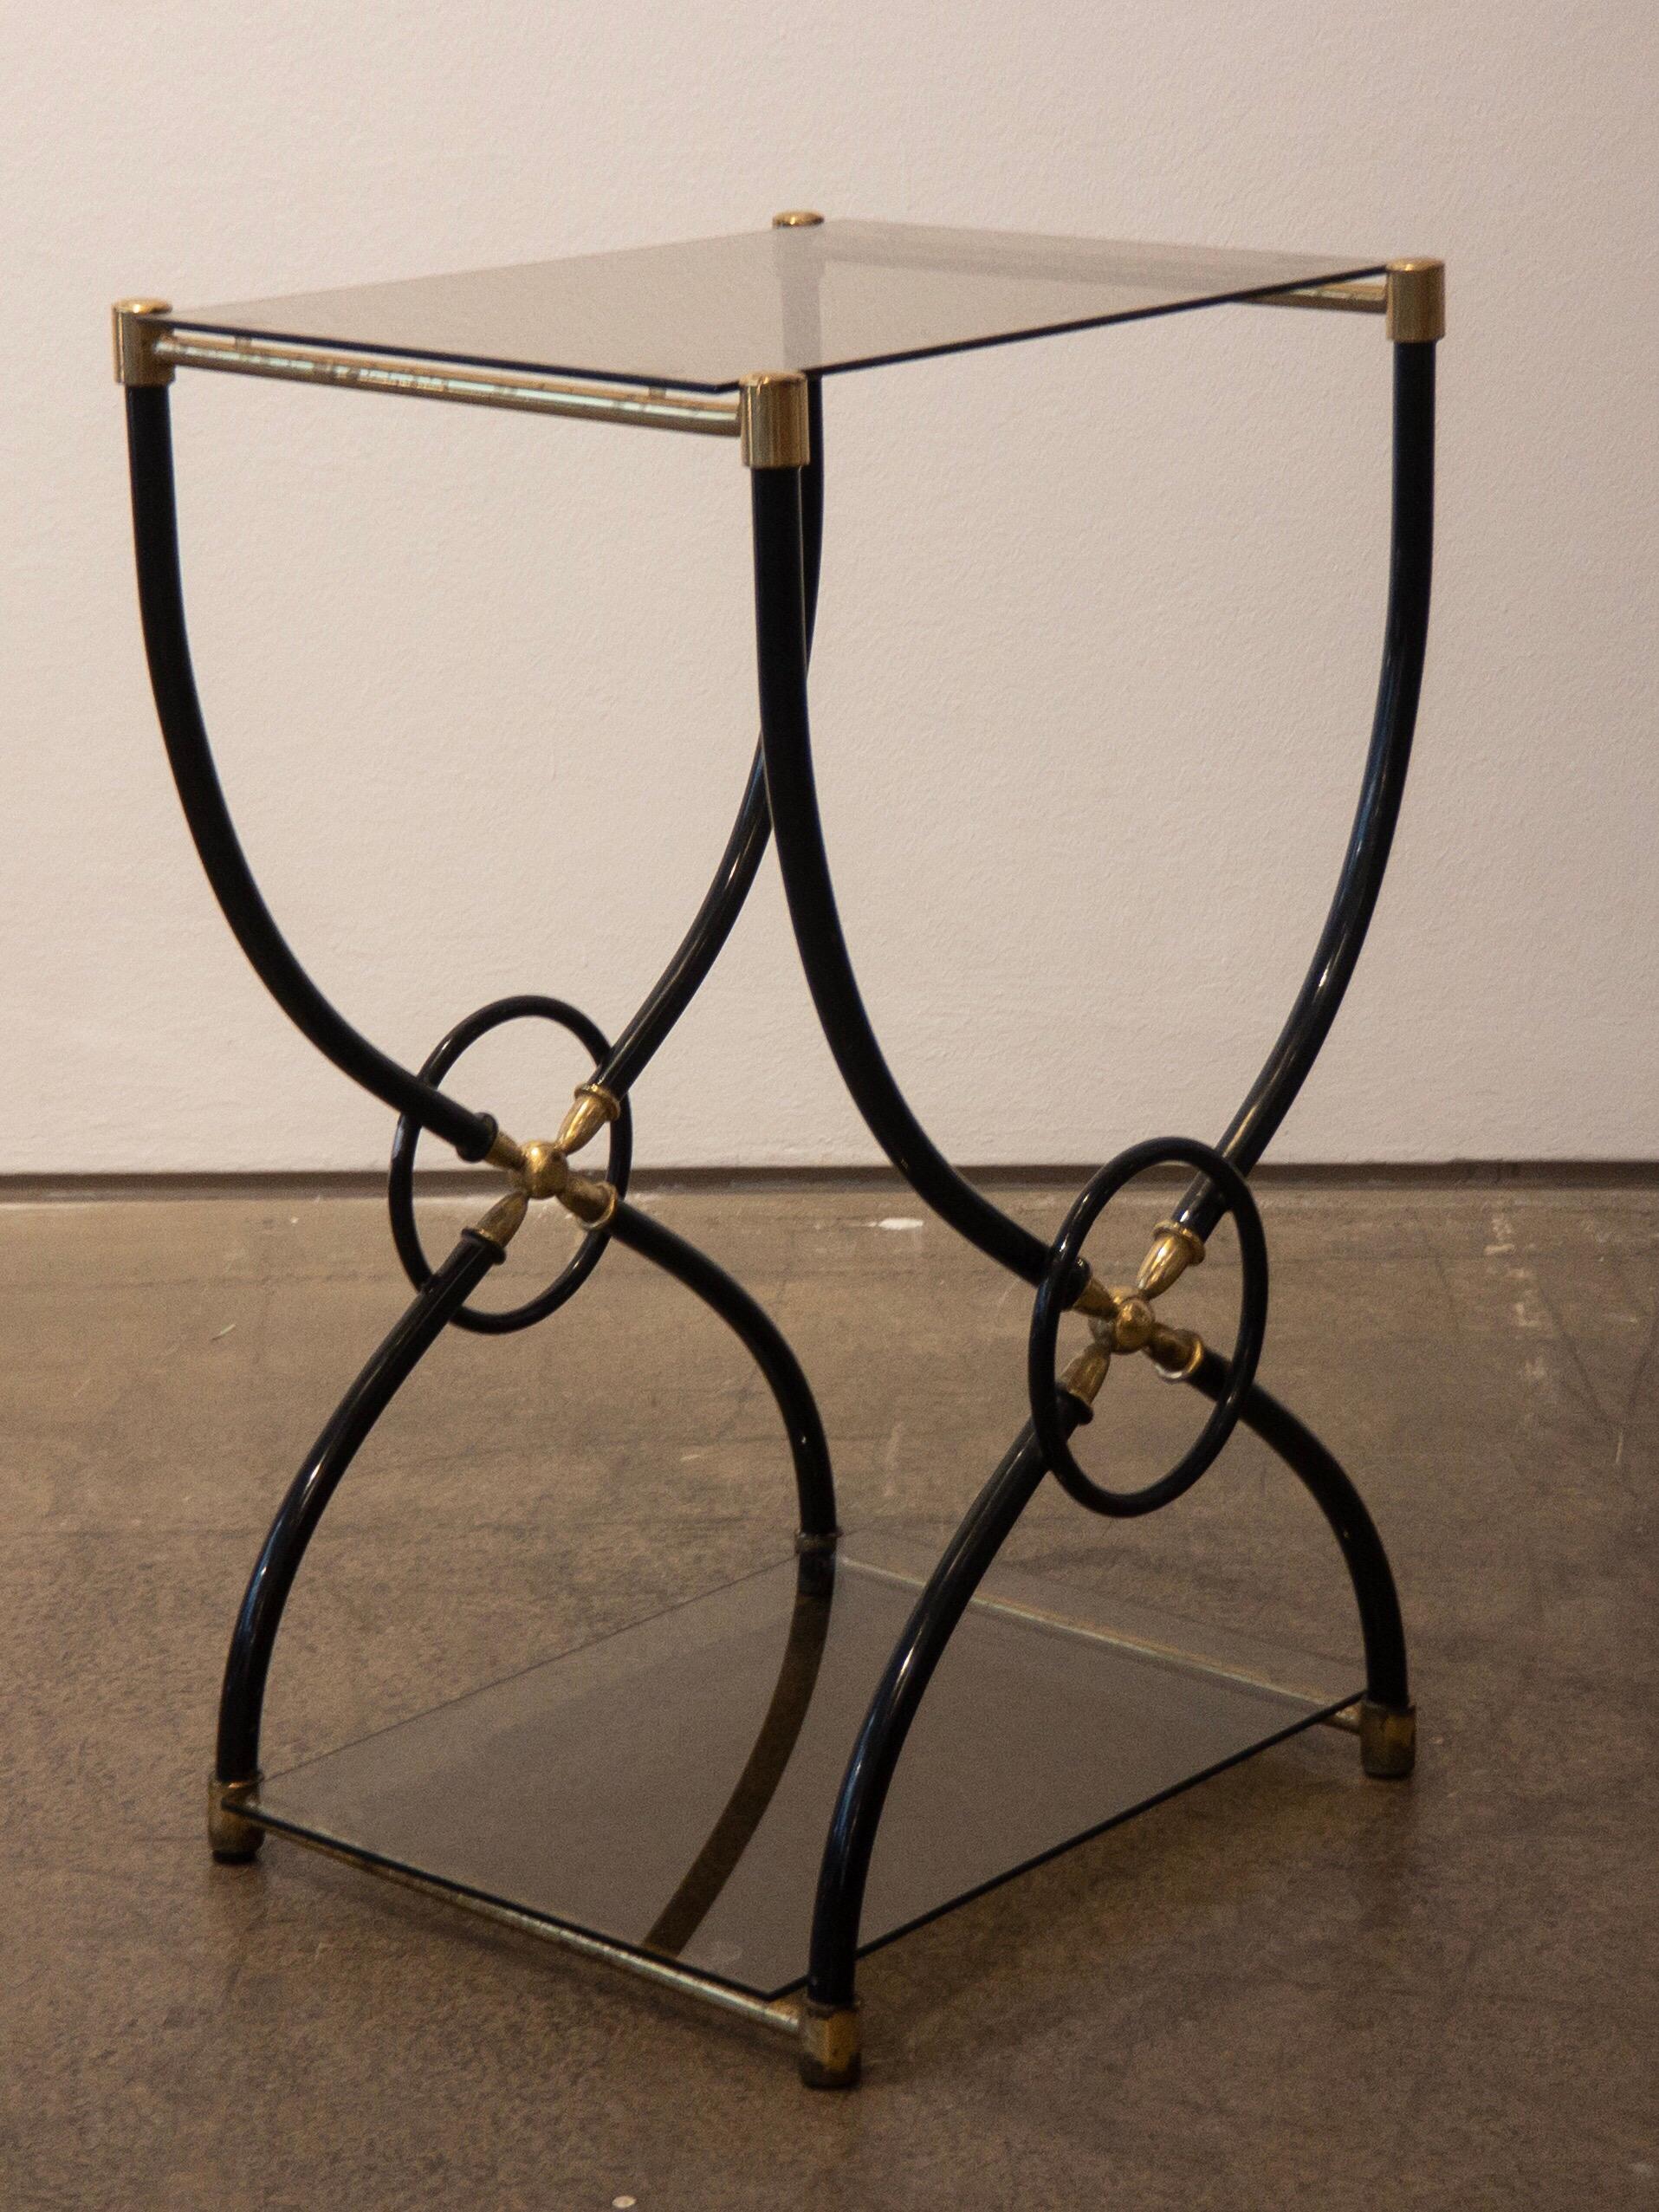 Patinated Midcentury Italian Nightstands with Brass Elements and Smoked Glass Plates